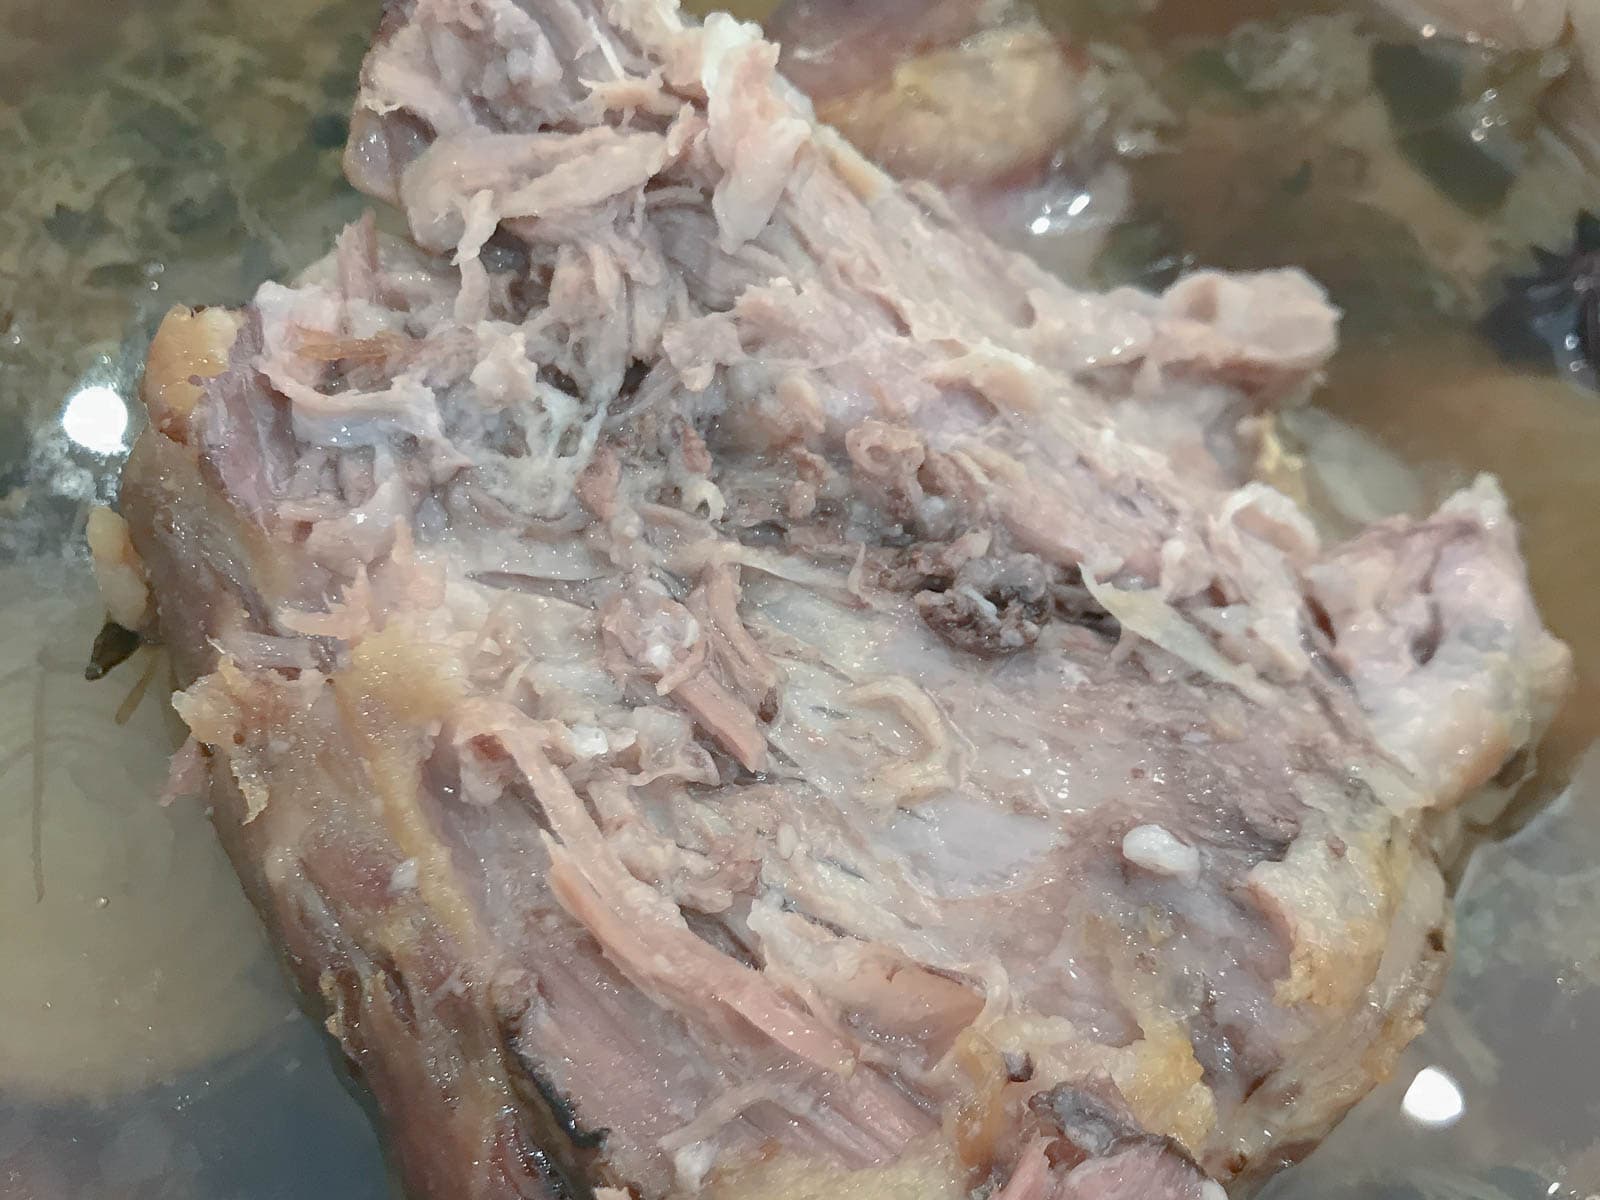 A large piece of pork shoulder cooked in a vegetable based broth